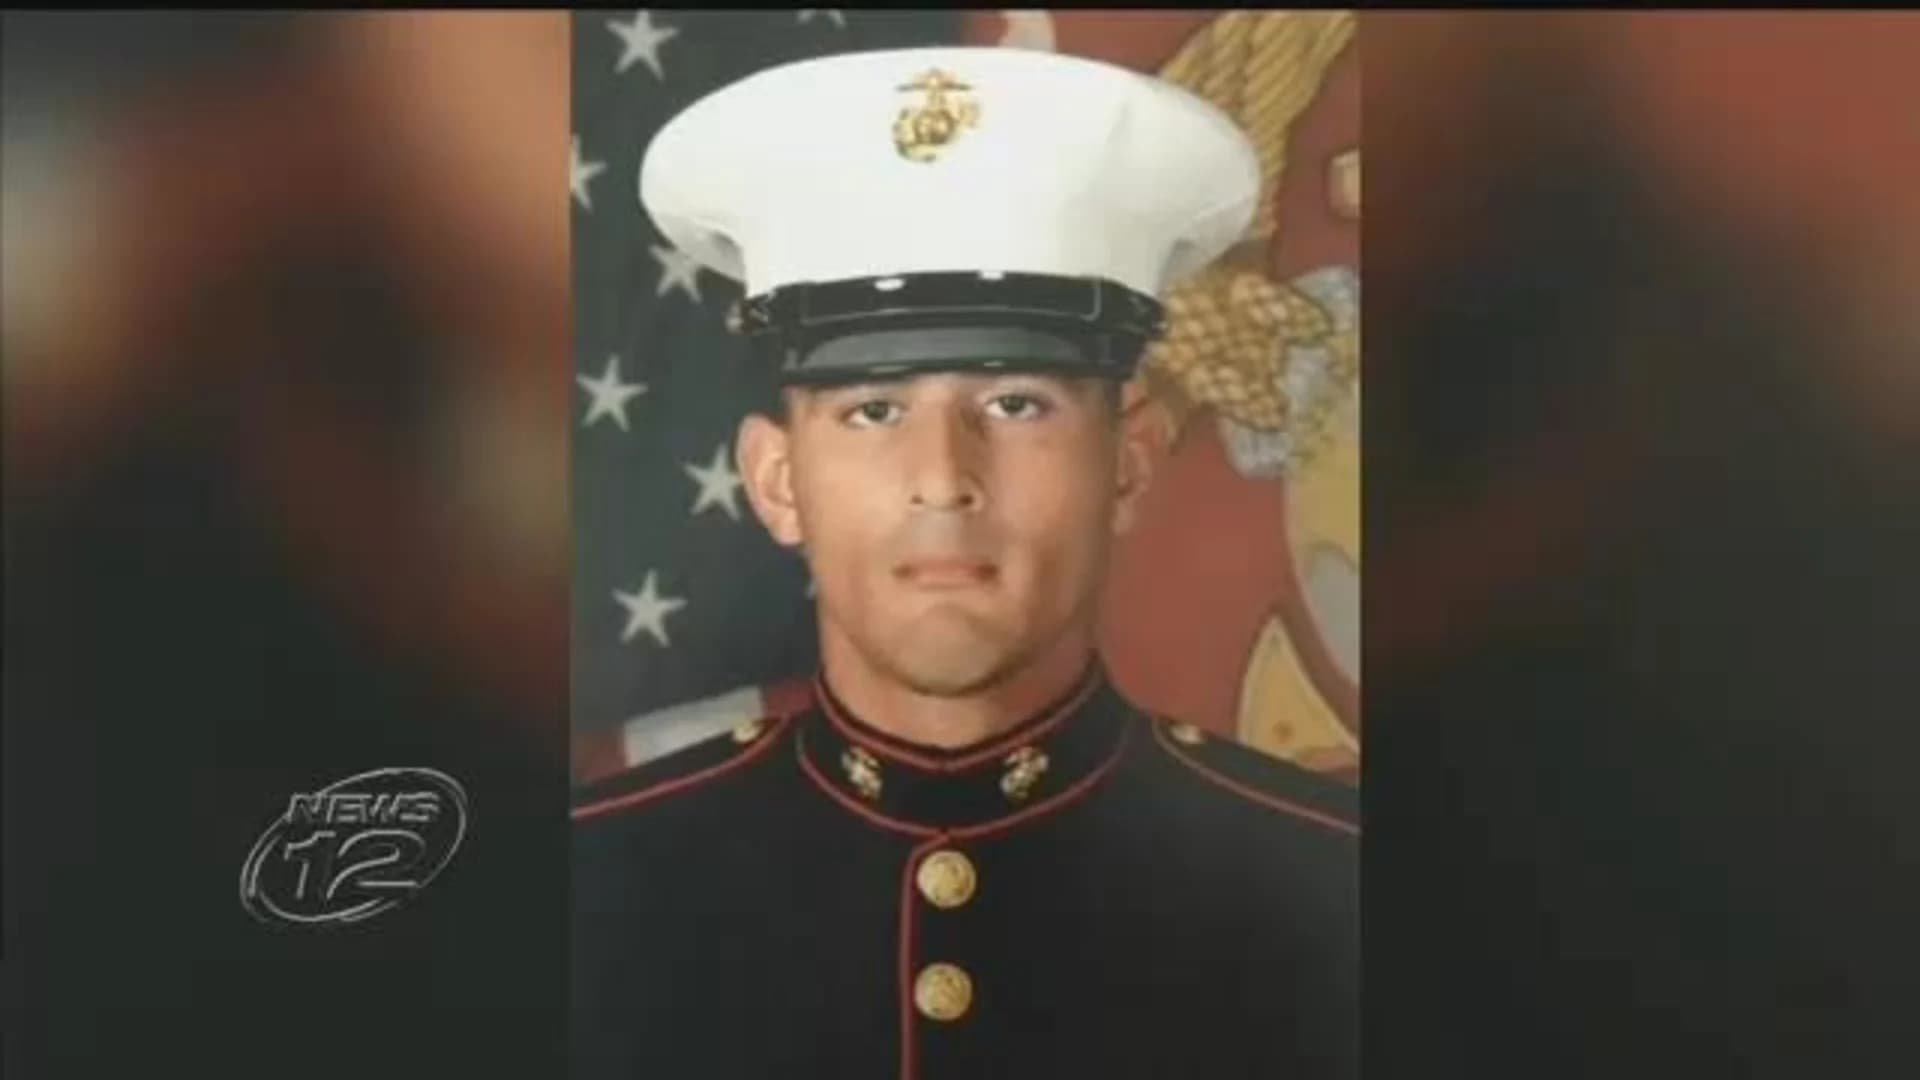 Arrest made after Marine injured in hit-and-run